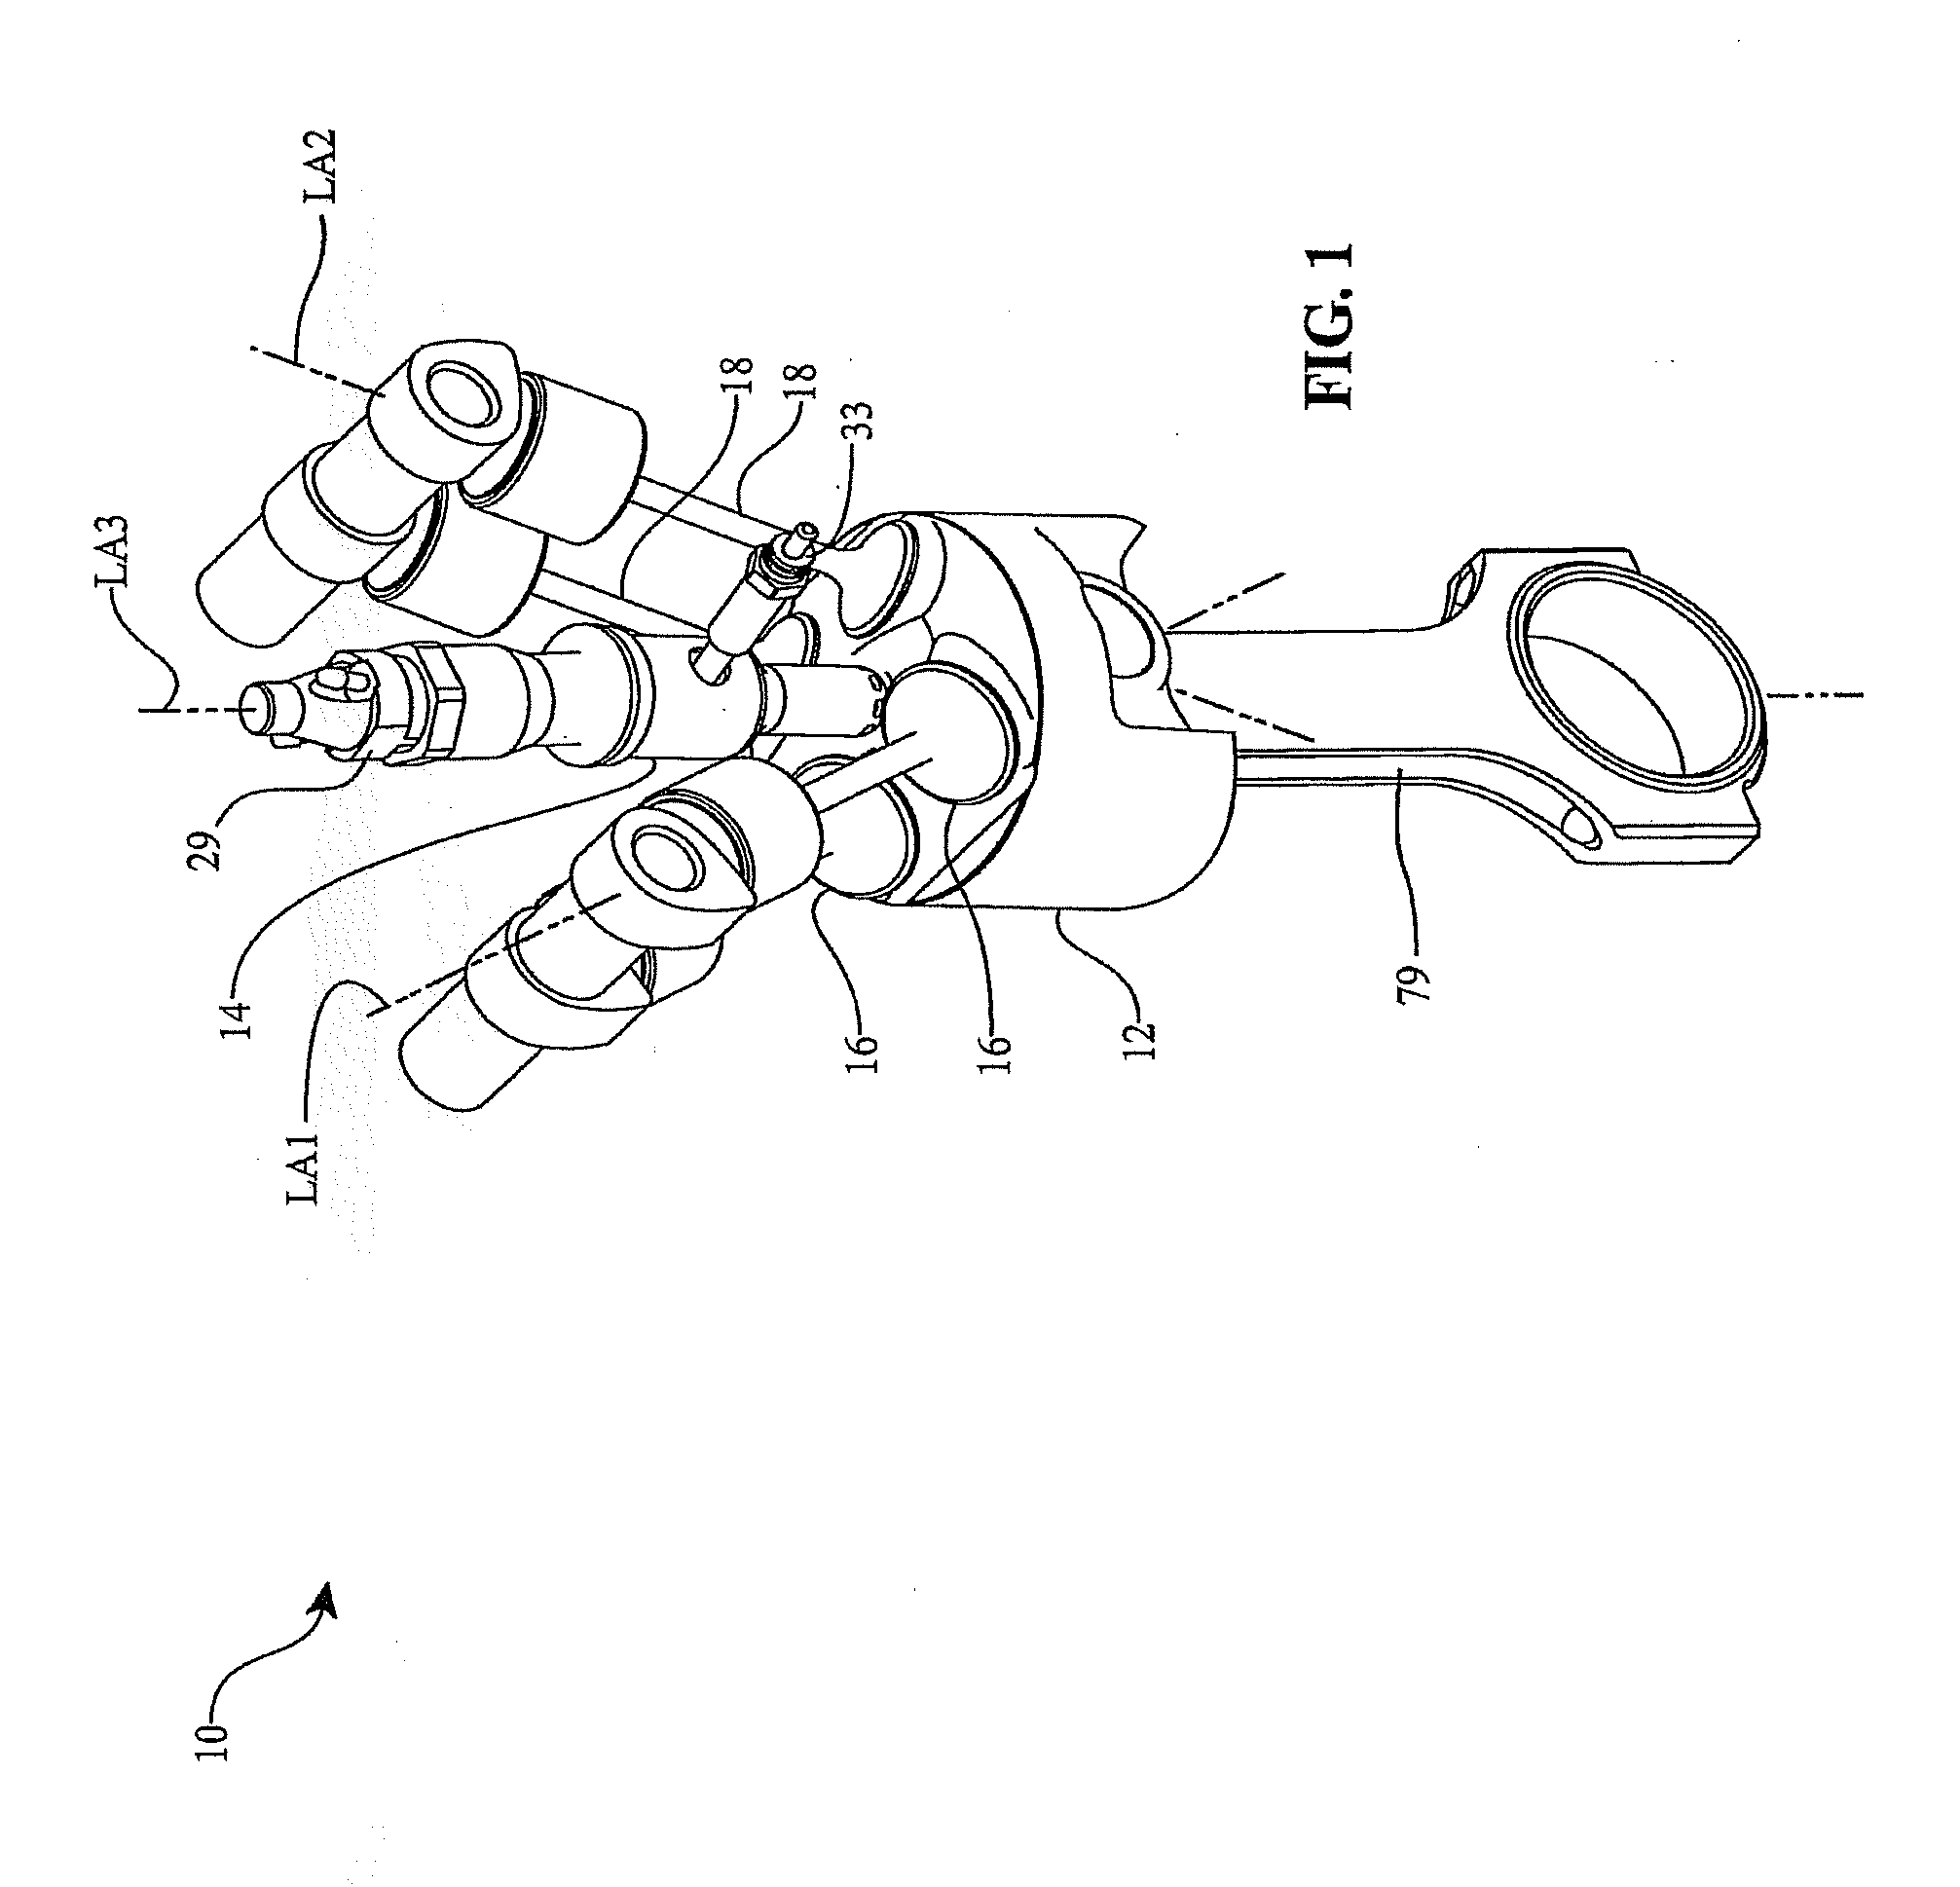 High efficiency compression ignition, indirect injected diesel engines and methods thereof